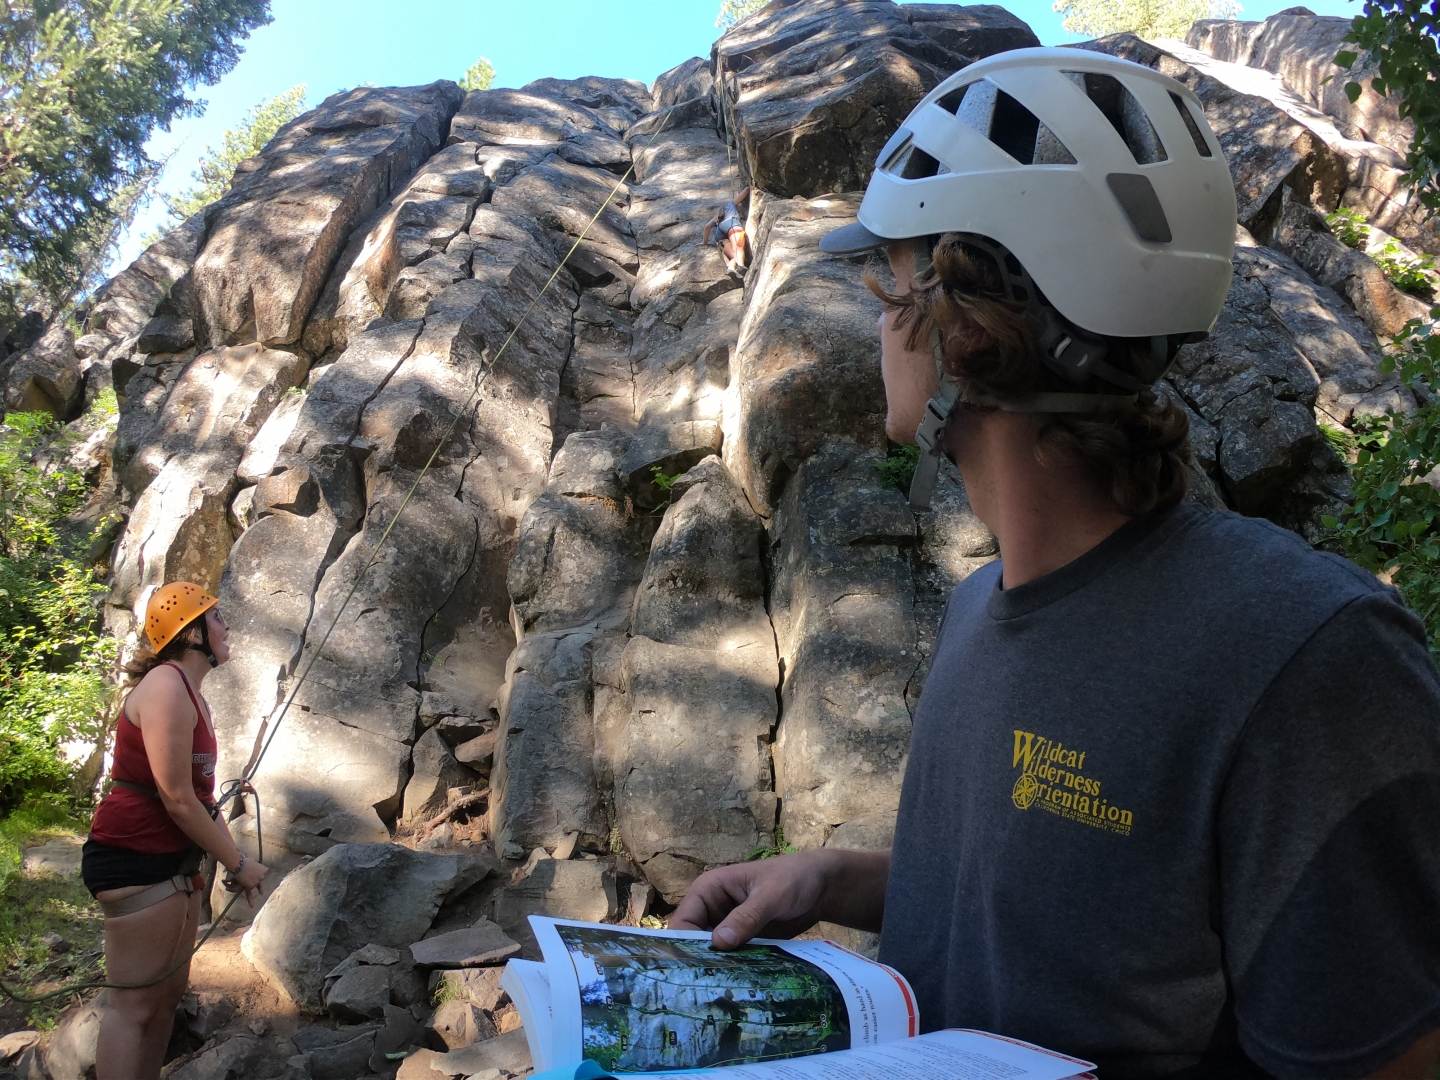 A student reads a guide book on rock climbing as students wearing helmets ascend a rock wall behind him.